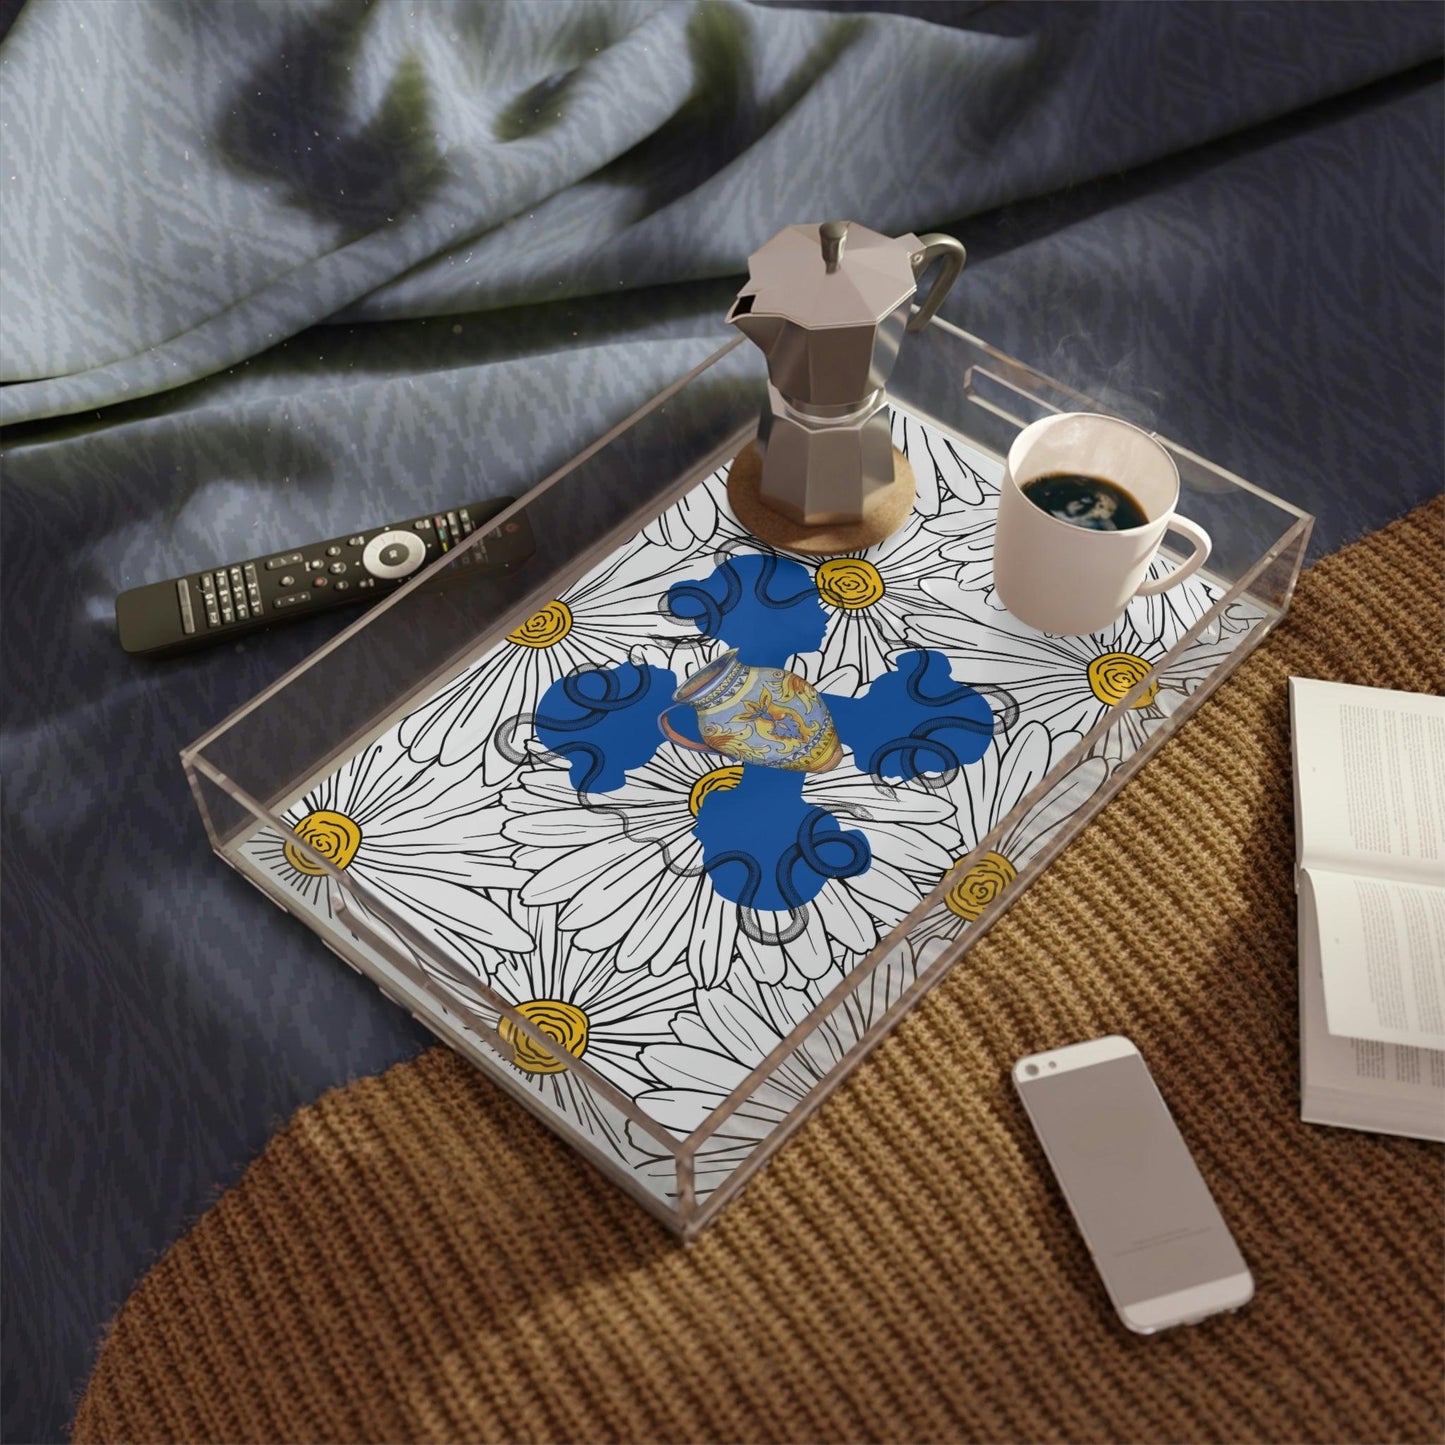 White Daisy Ladies in Blue Acrylic Serving Tray - MAIA HOMES